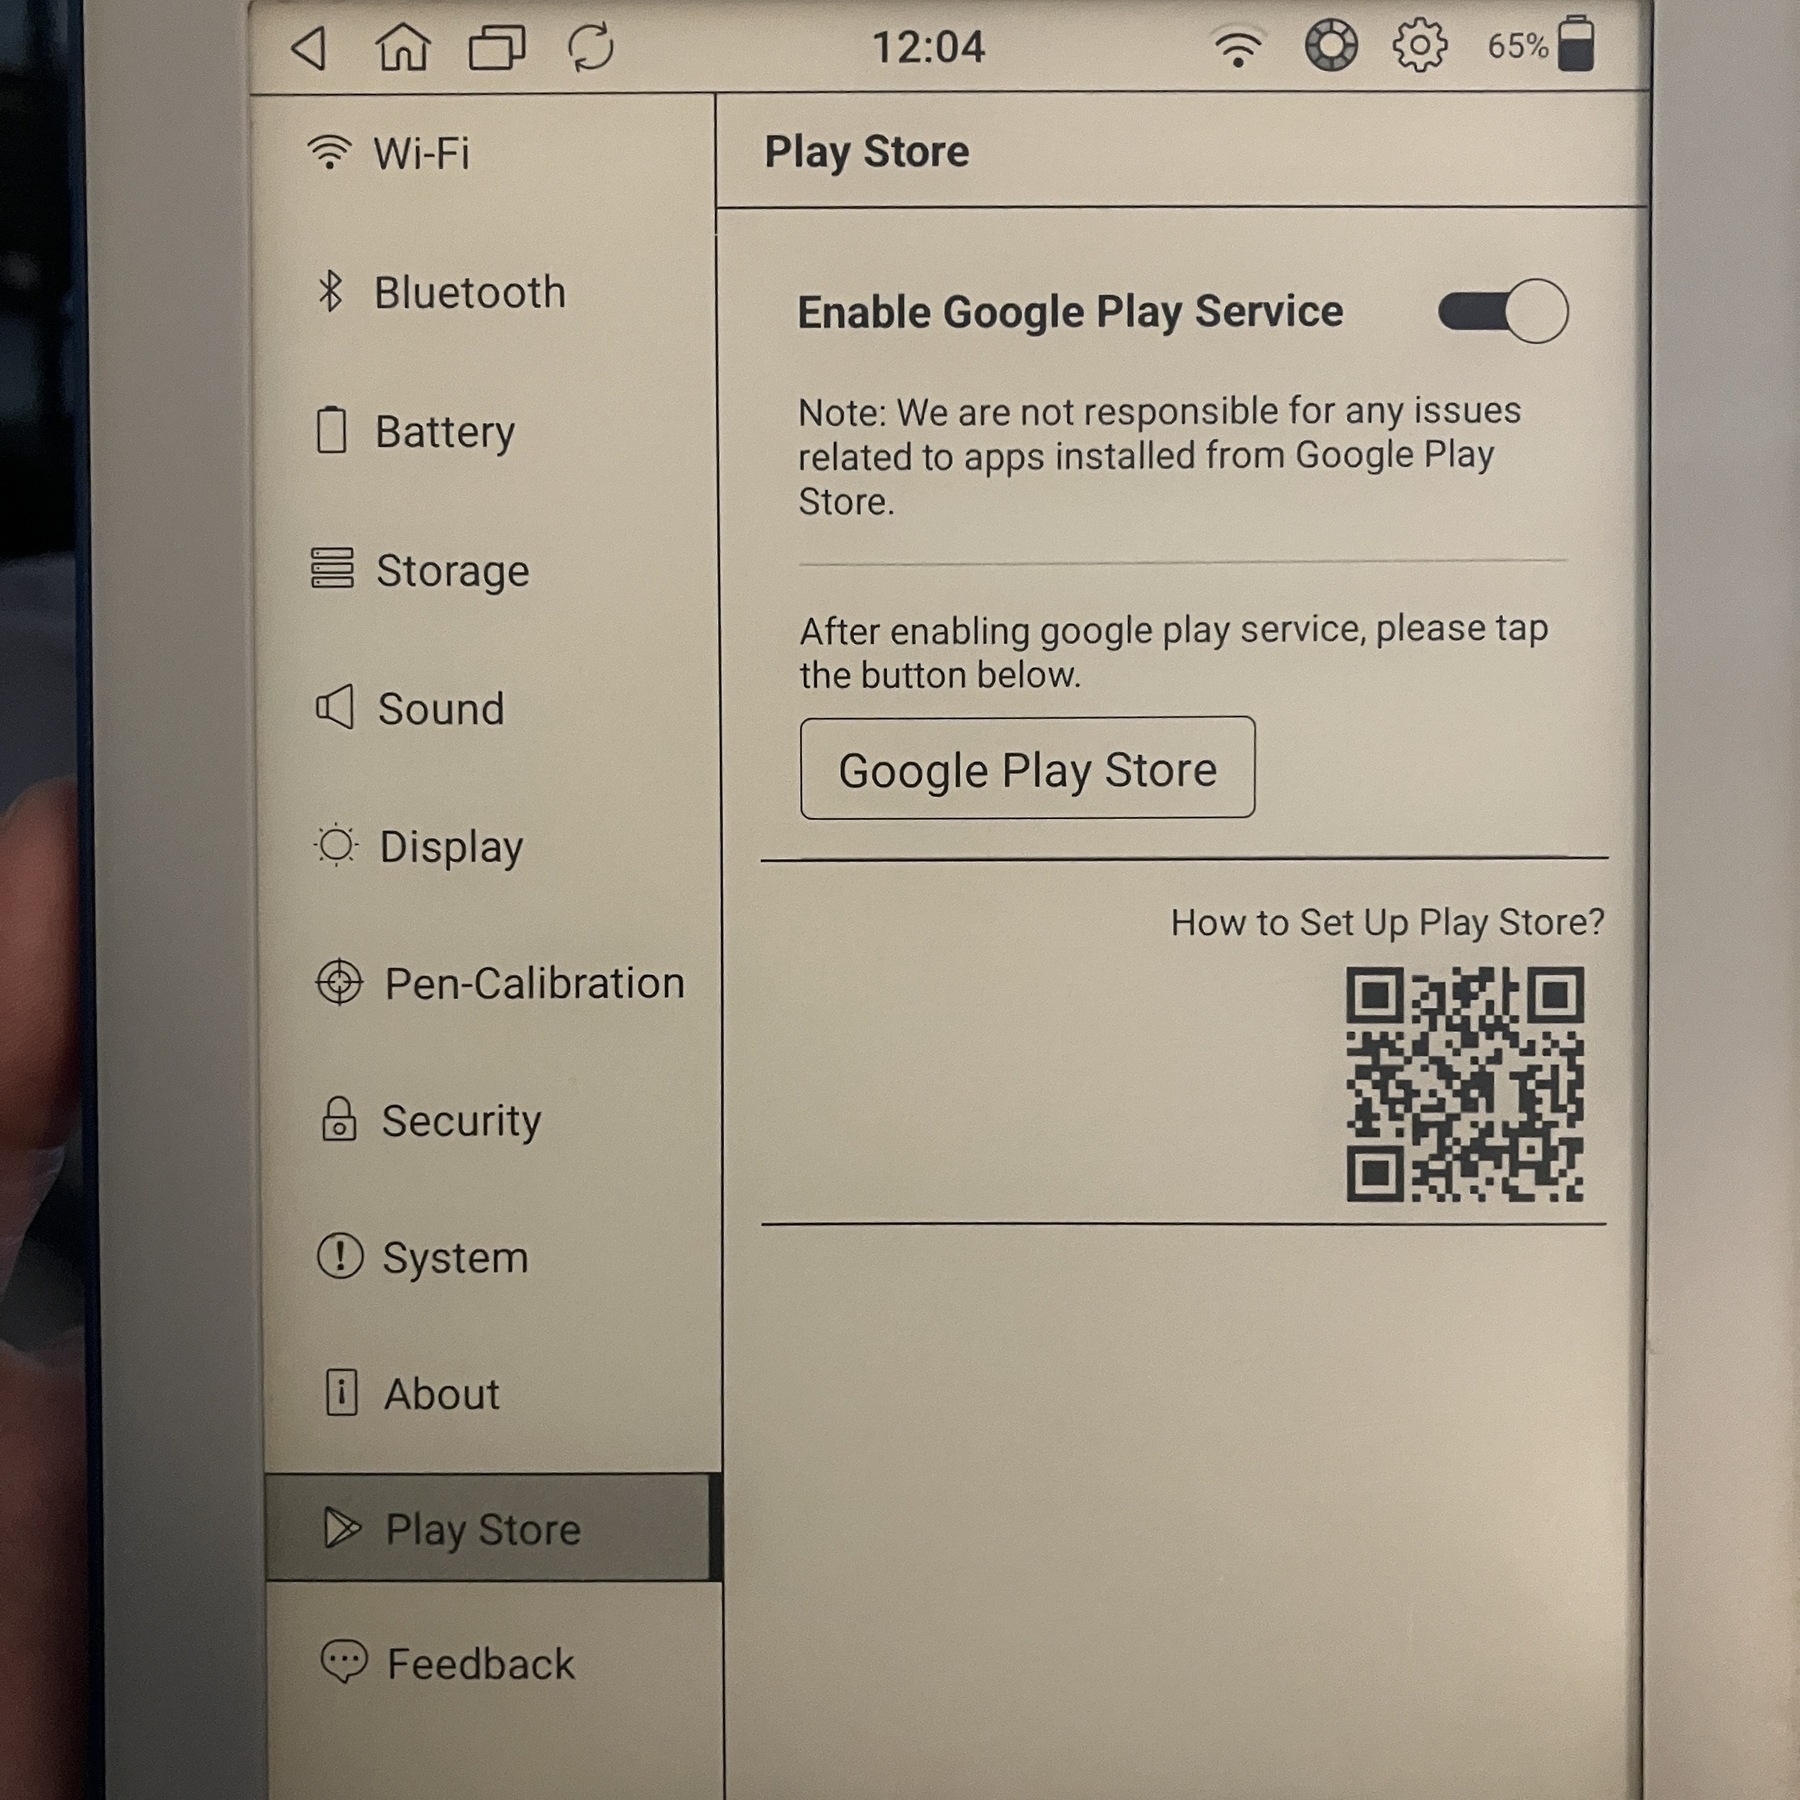 A screenshot of the Google Play Store settings on the MobiScribe Wave